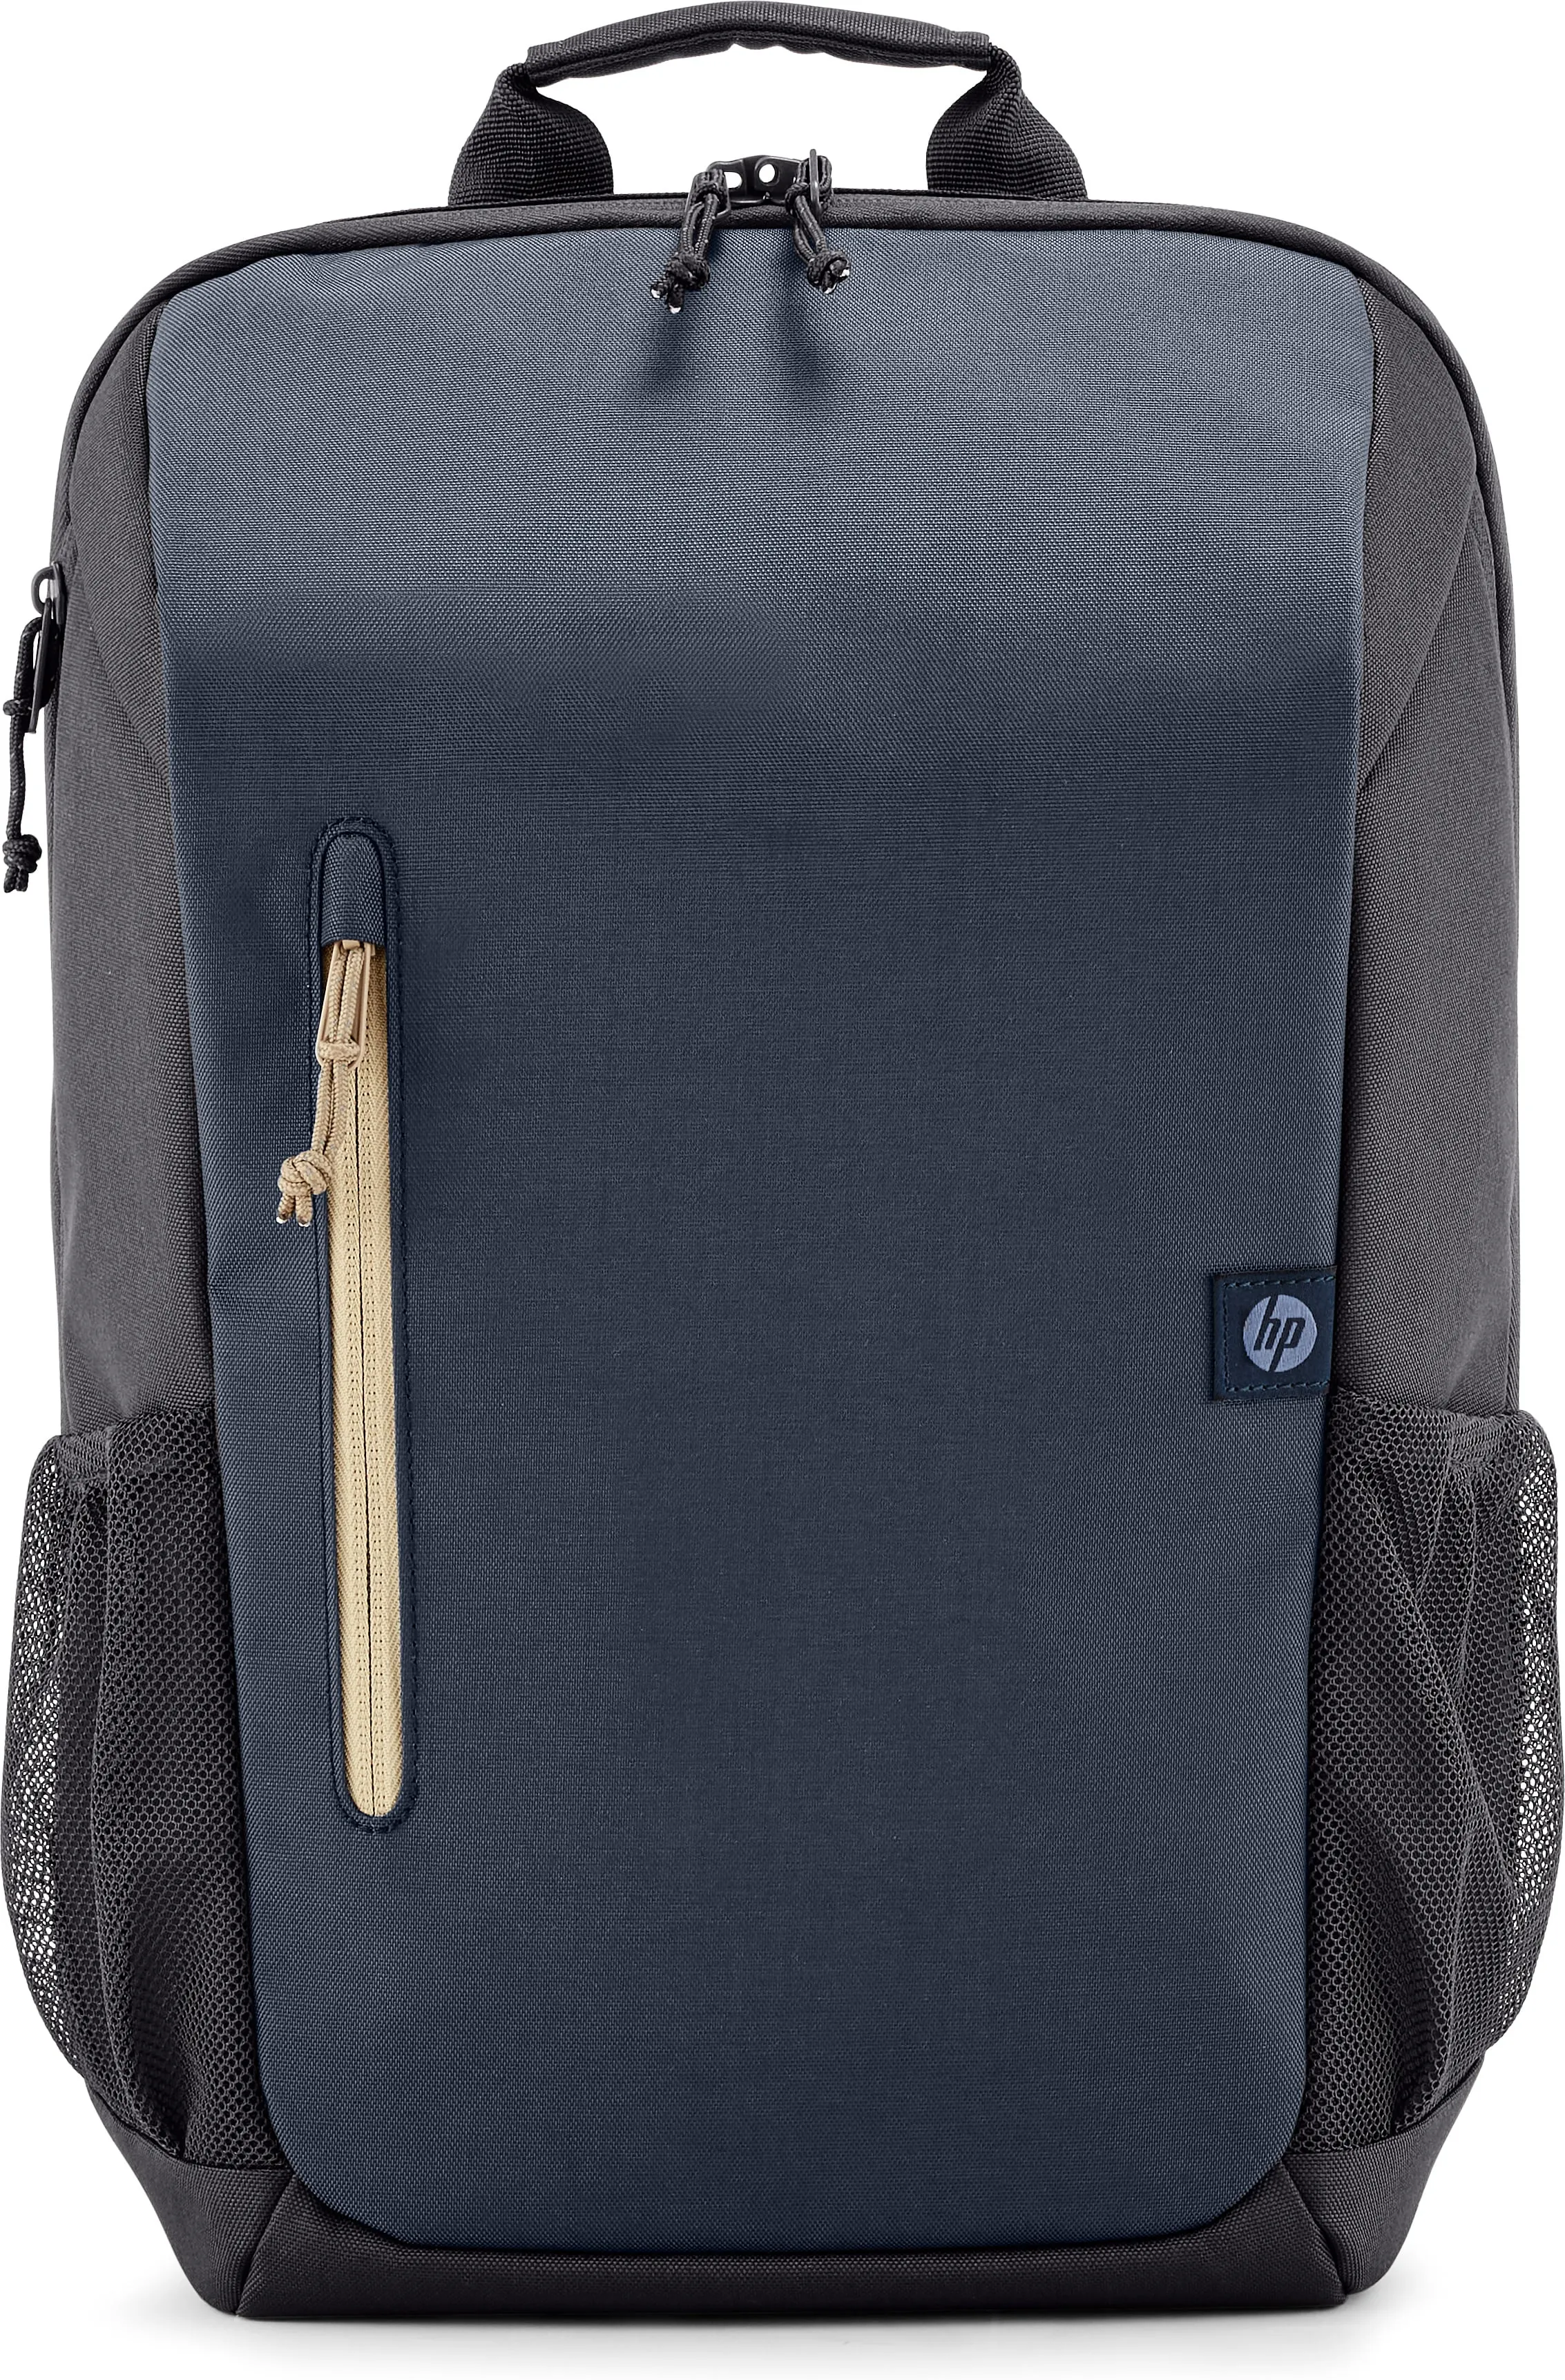 Achat HP Travel BNG 15.6inch Backpack au meilleur prix